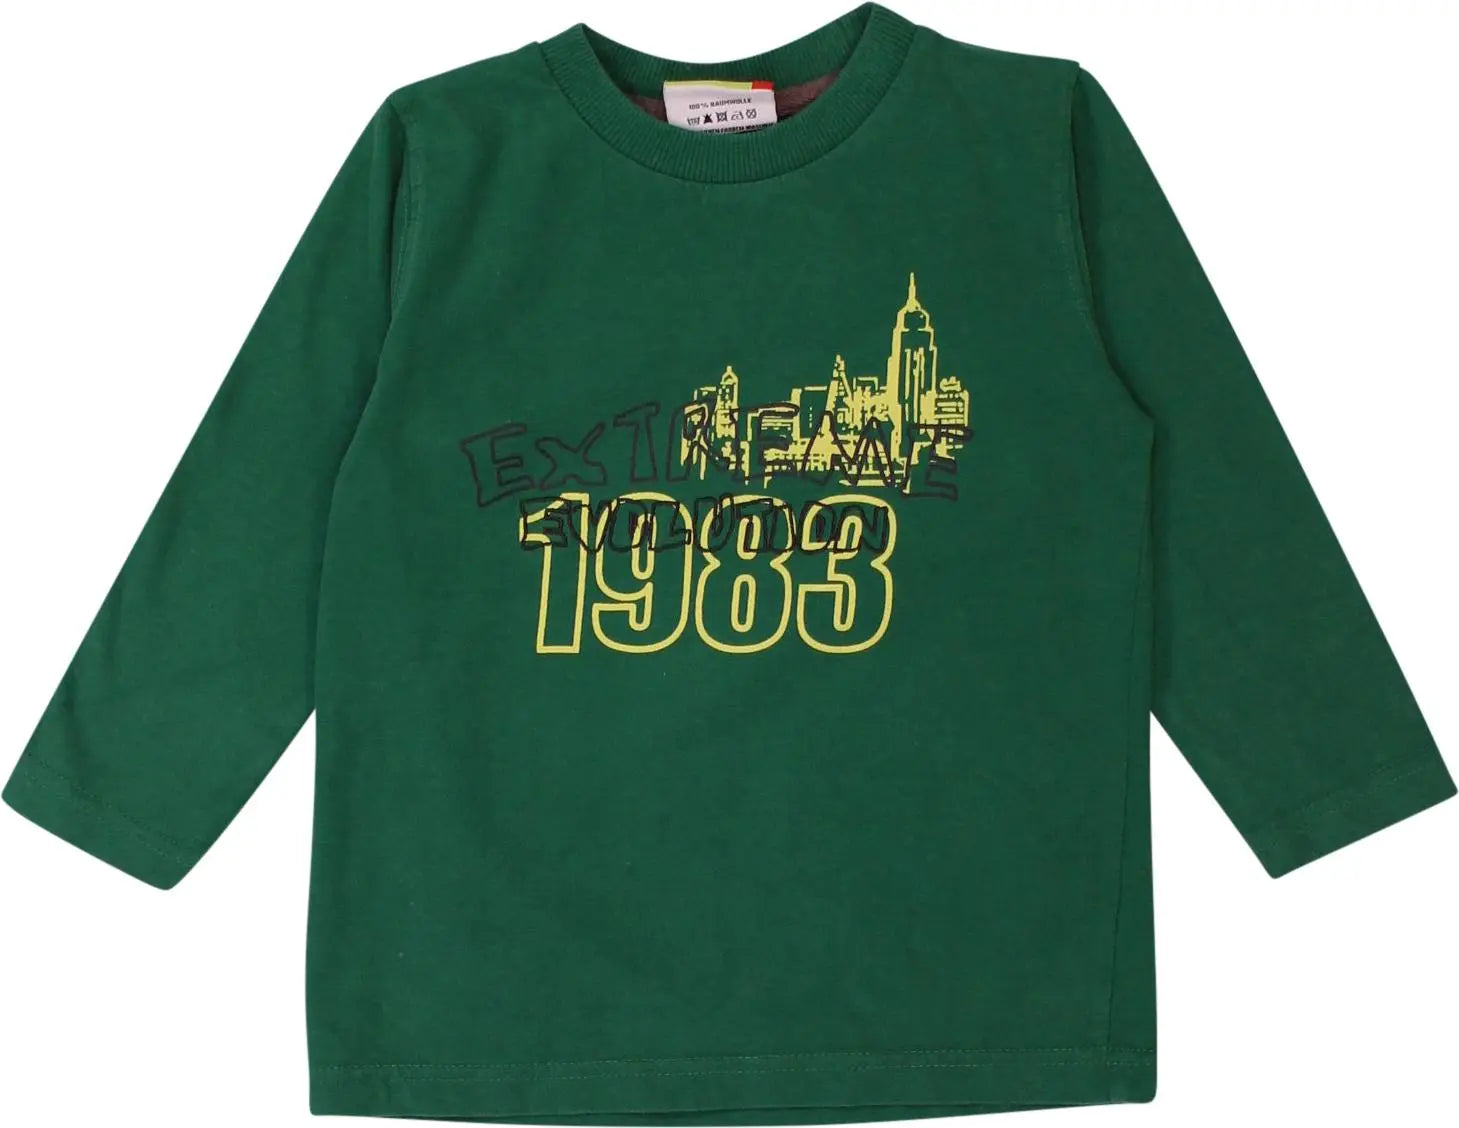 Topolino - BLUE11606- ThriftTale.com - Vintage and second handclothing